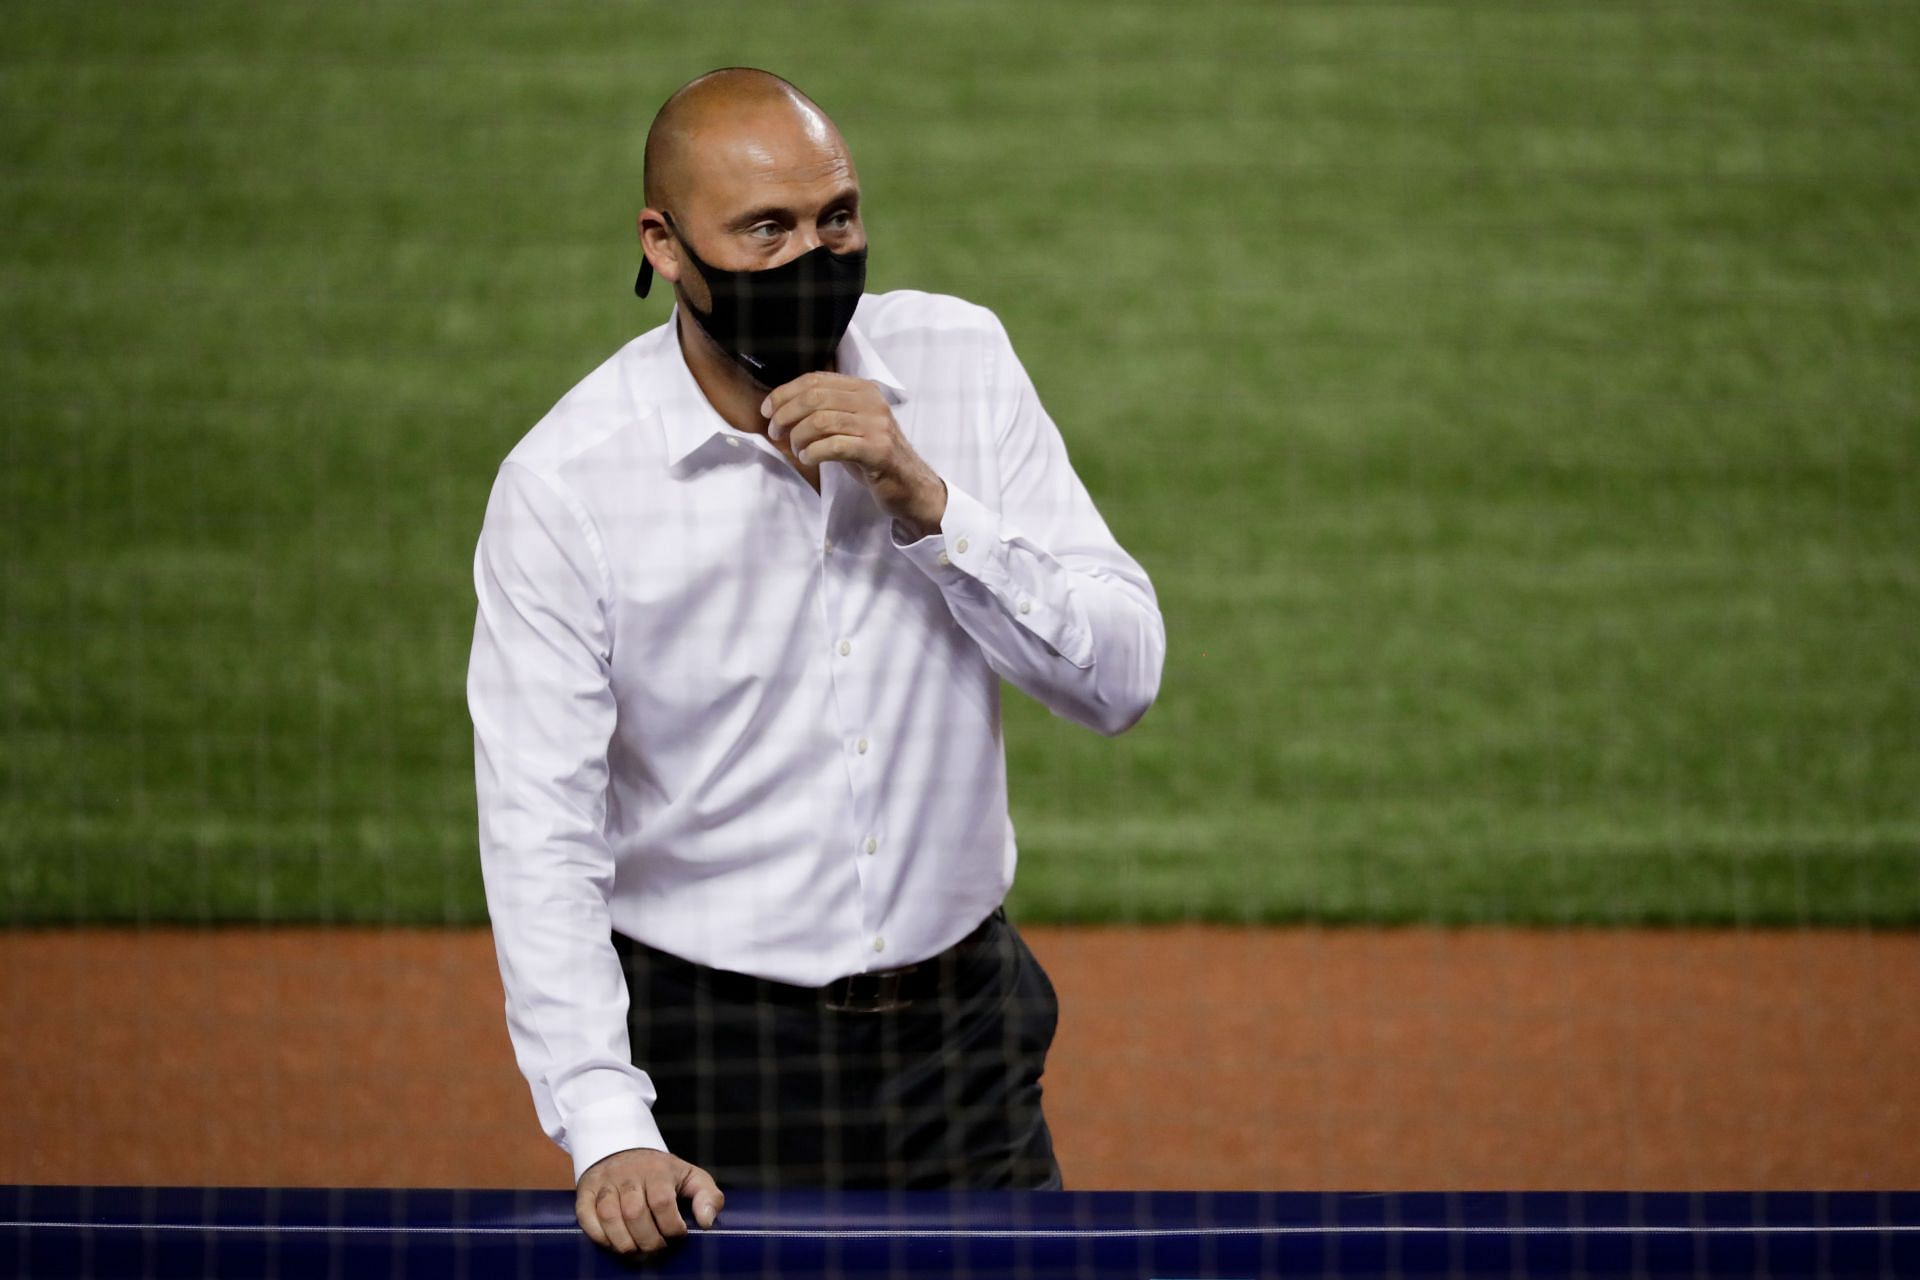 Former Miami Marlins part-owner and chief executive officer Derek Jeter looks on prior to their game against the Philadelphia Phillies at Marlins Park on September 12, 2020, in Miami, Florida.